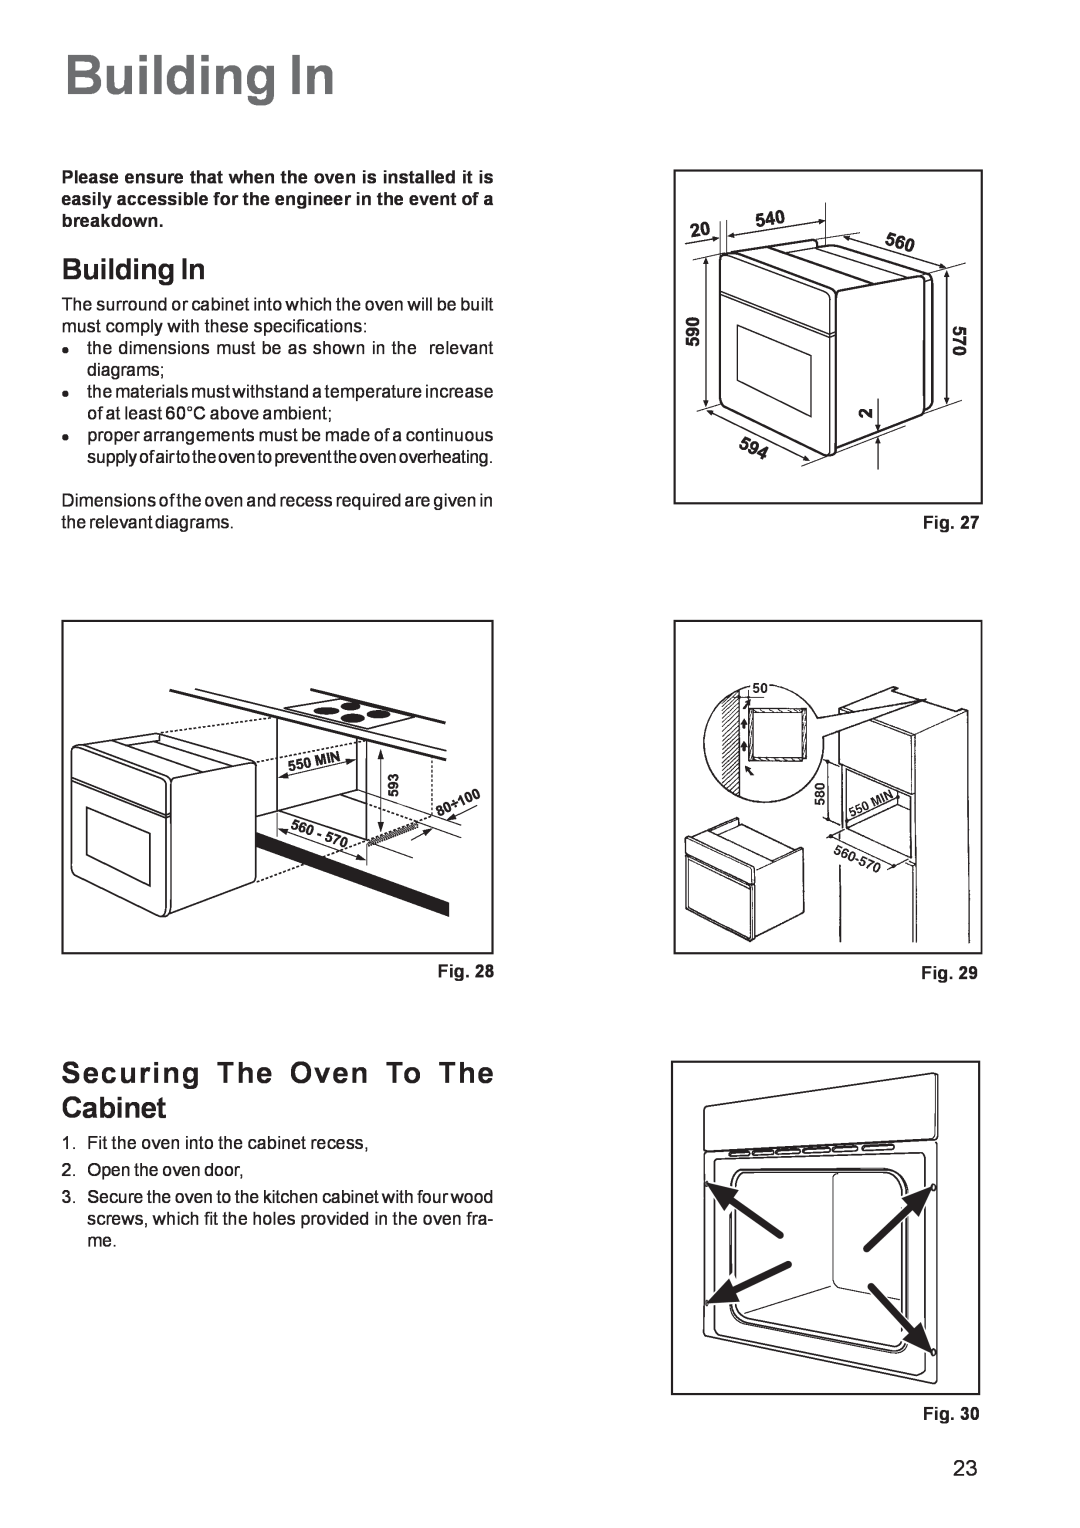 Zanussi ZOB 1060 manual Building In, Securing The Oven To The Cabinet, Fig. Fig. Fig 